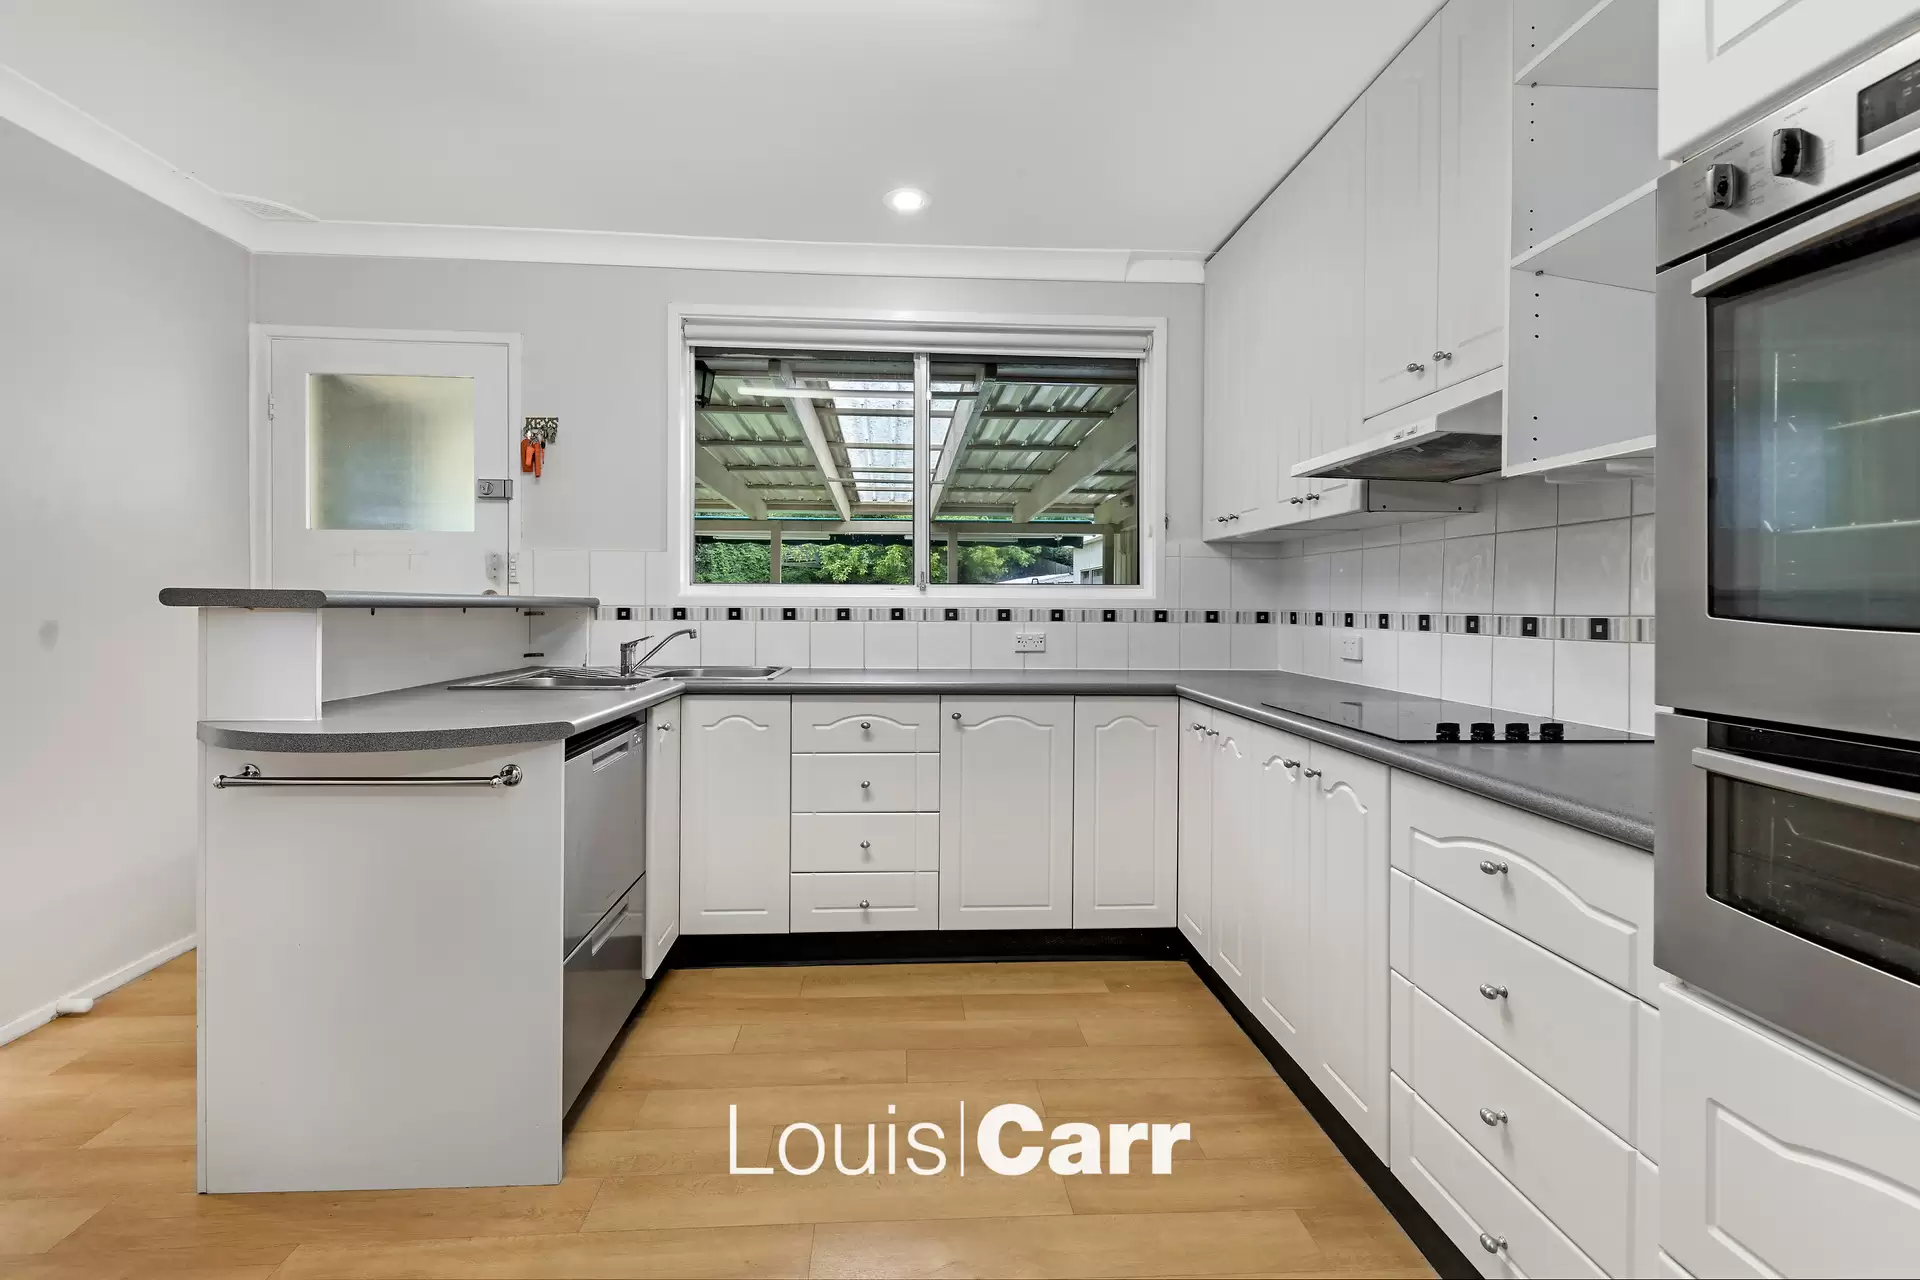 Photo #2: 24 Waninga Road, Hornsby Heights - Leased by Louis Carr Real Estate